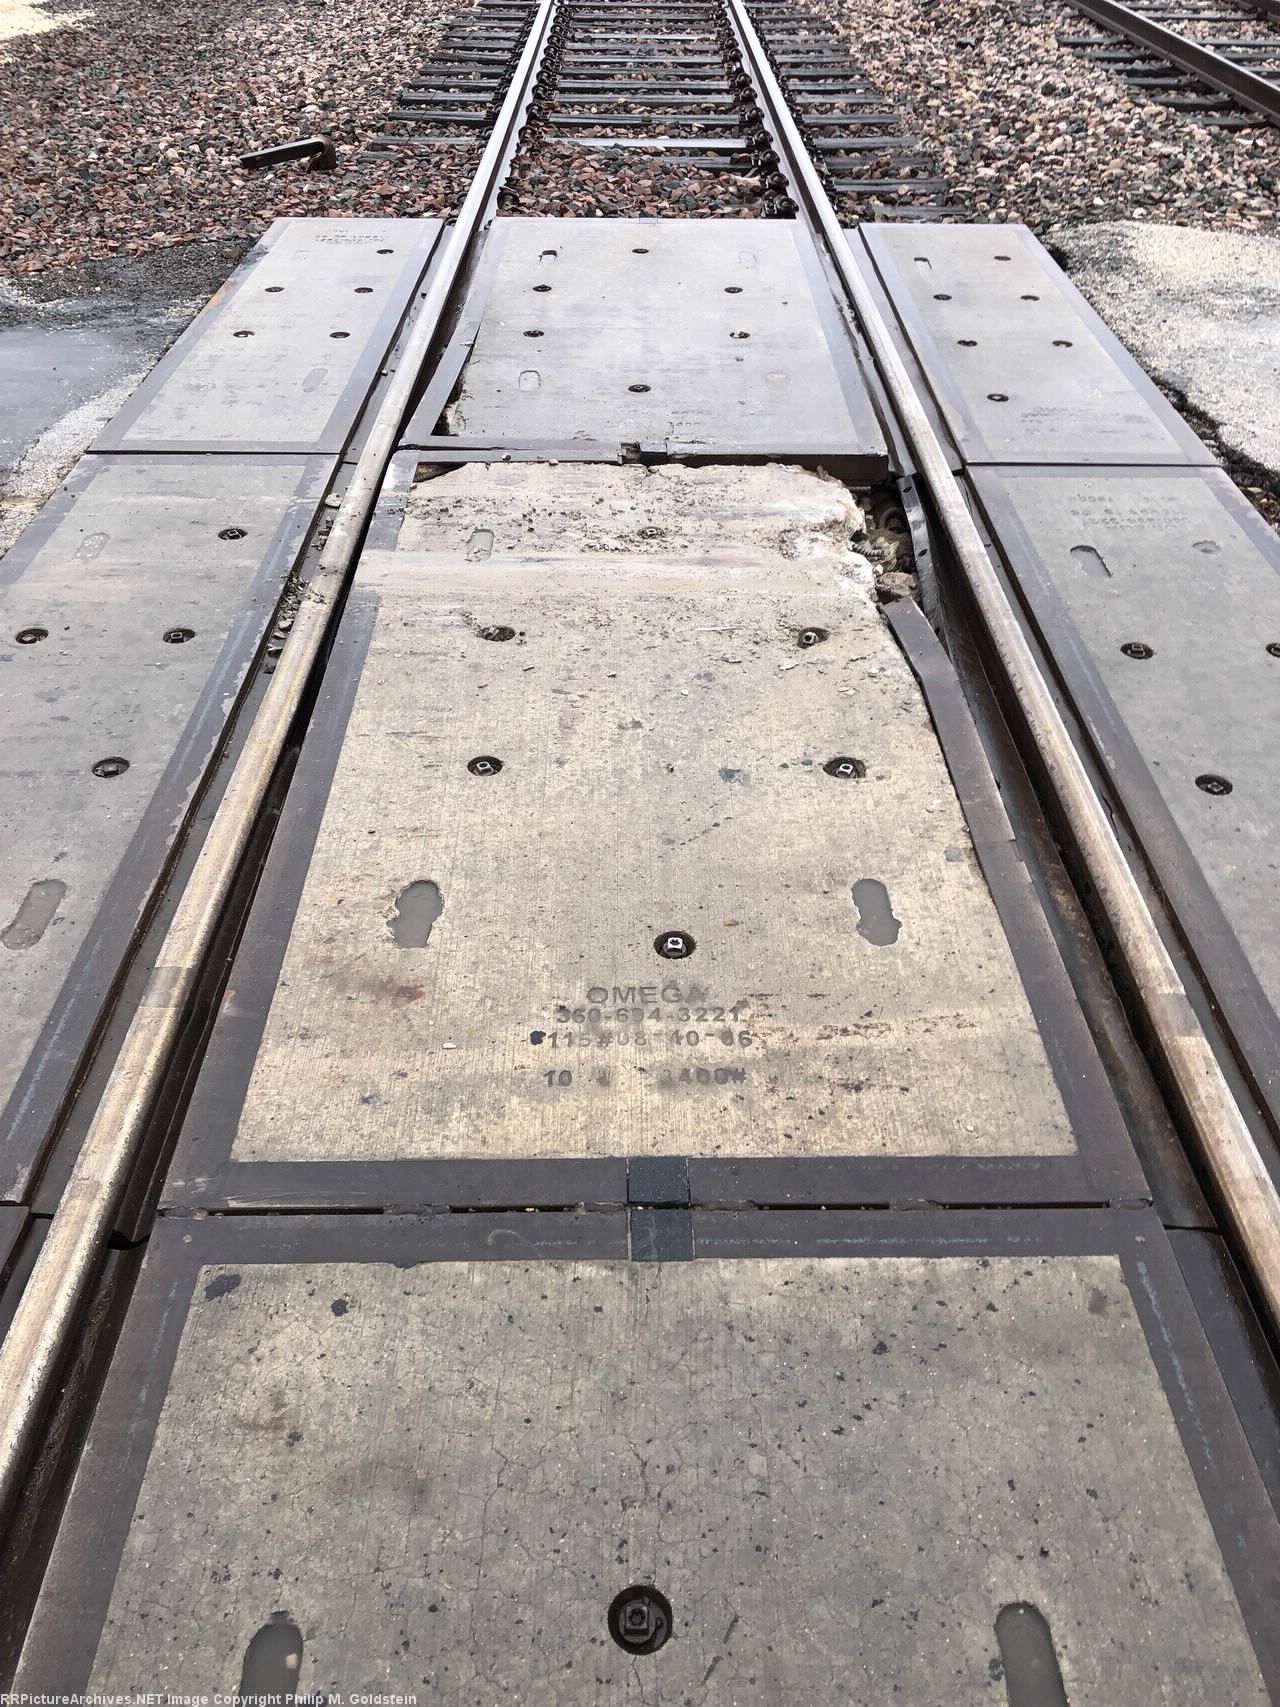 Another view of the roached crossing panels